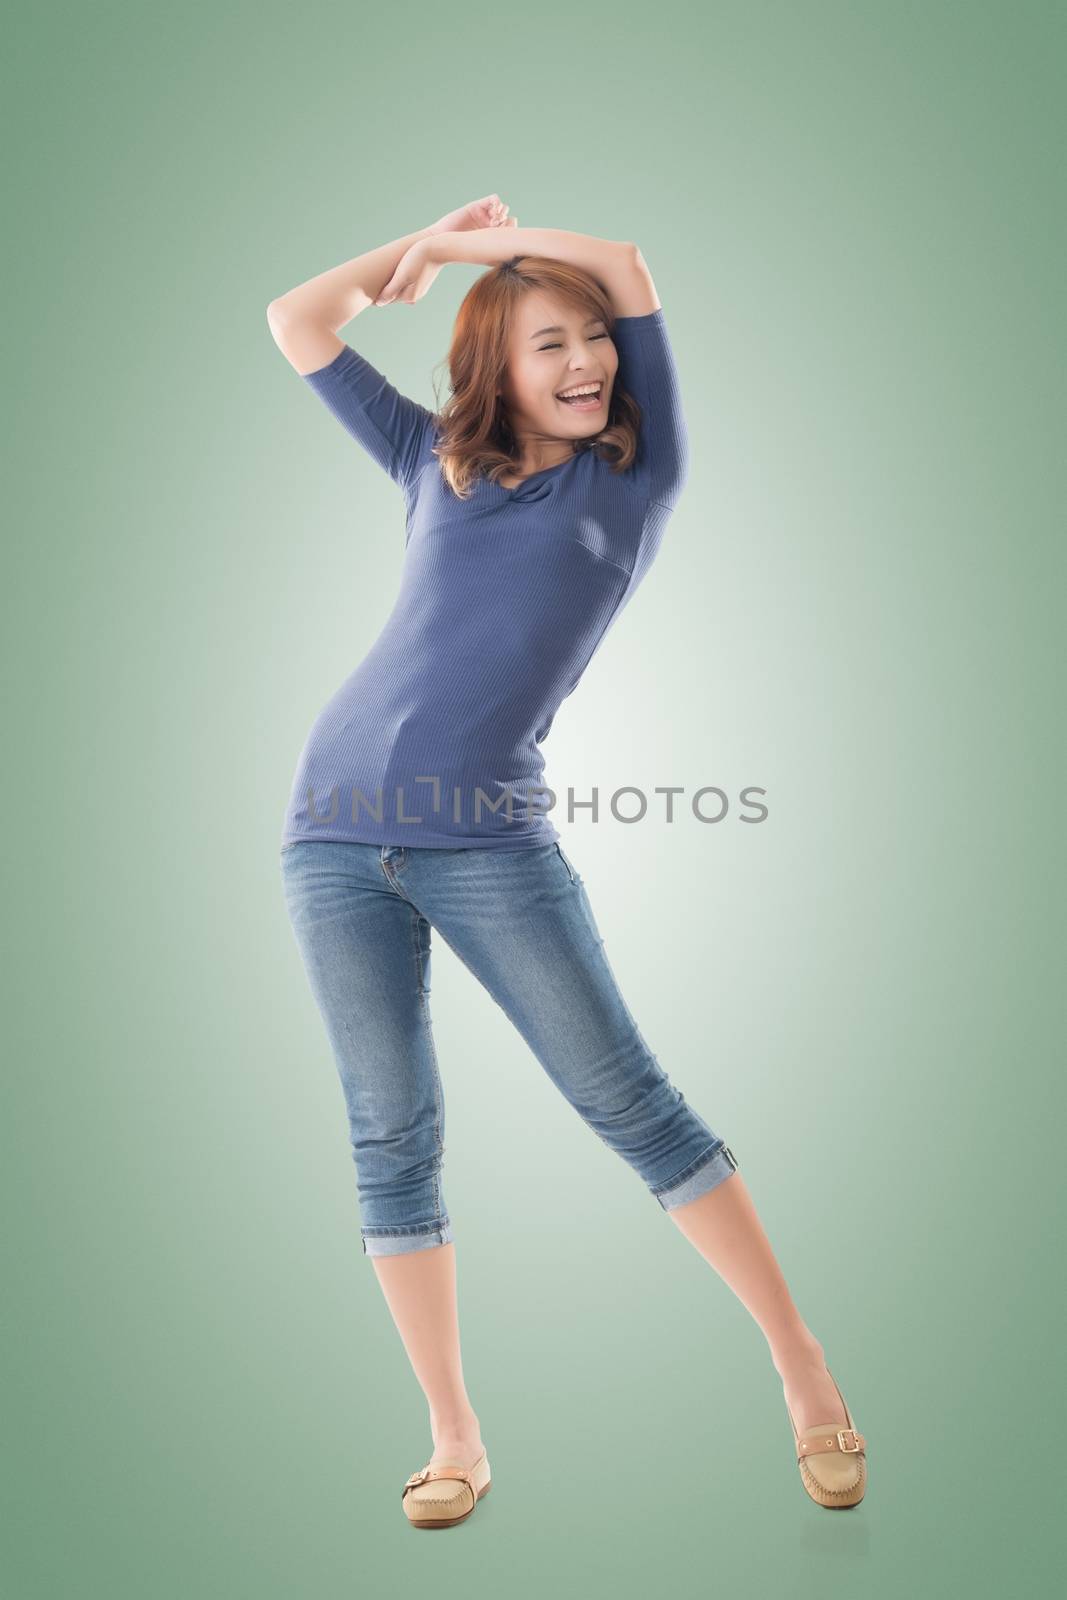 Excited Asian young girl by elwynn